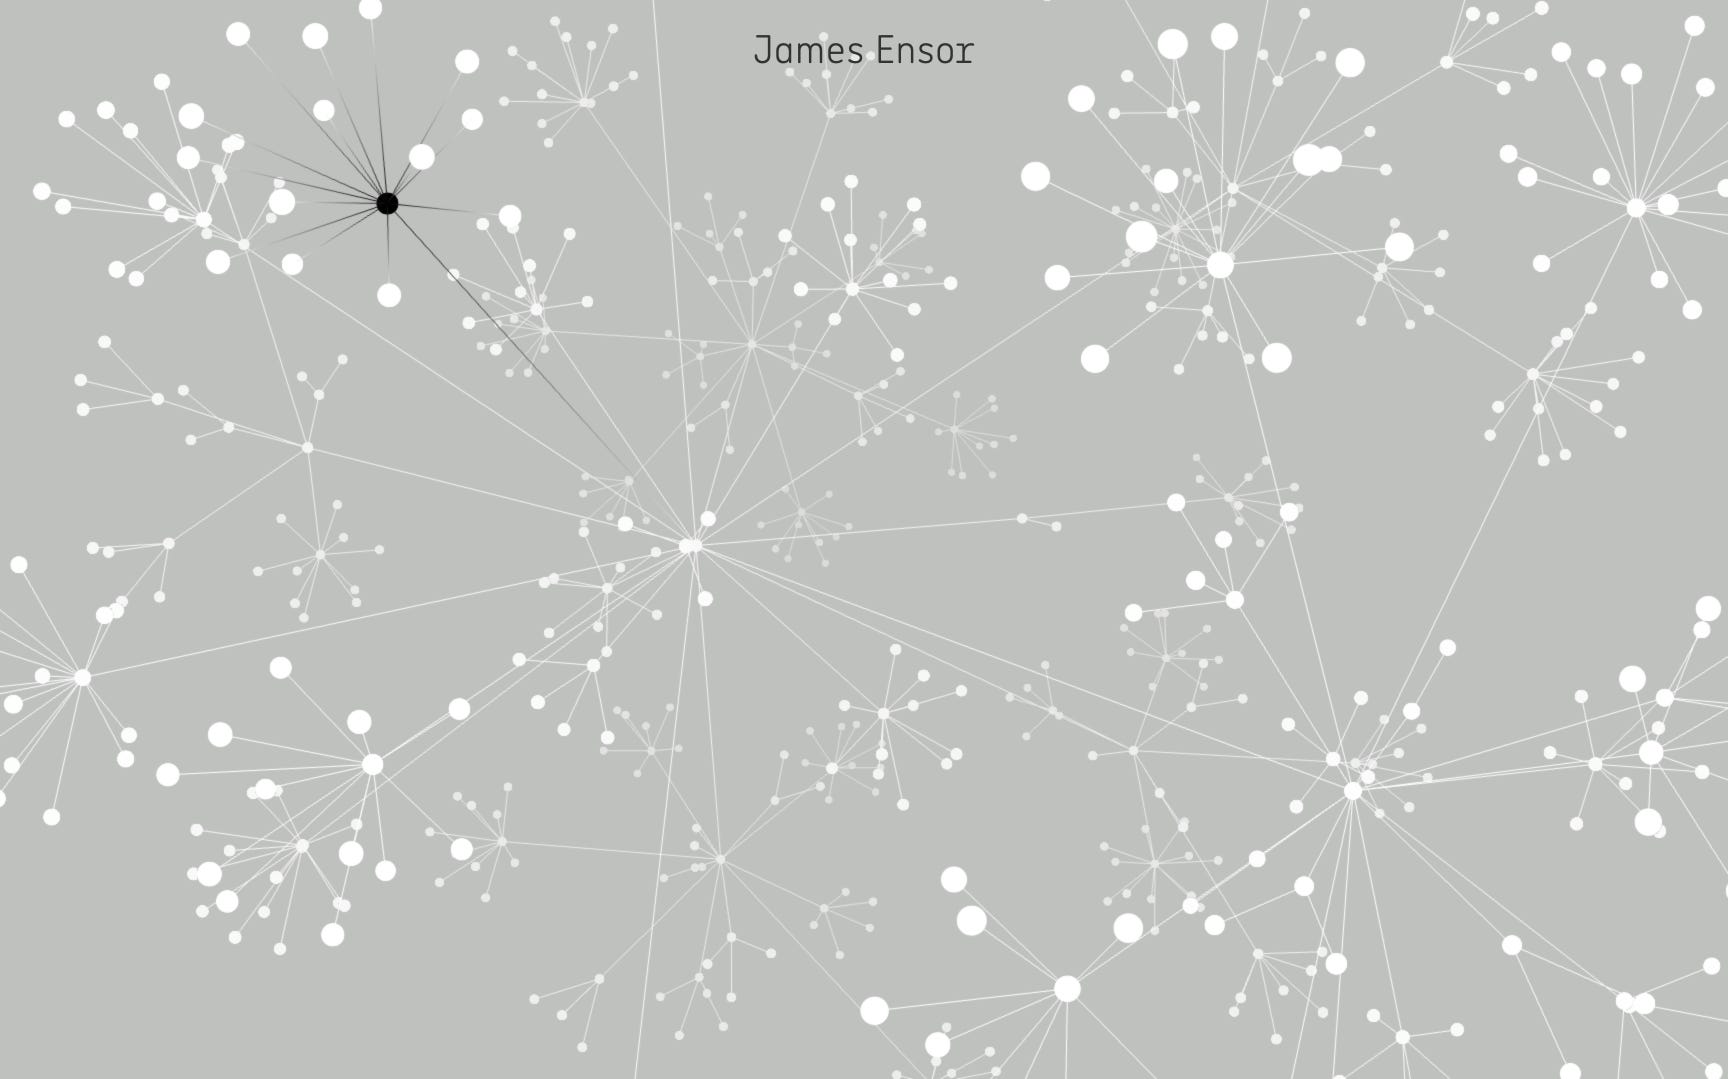 A constellation of white dots connected by white lines. One dot is black in the upper right hand corner with a label that says, "James Ensor"